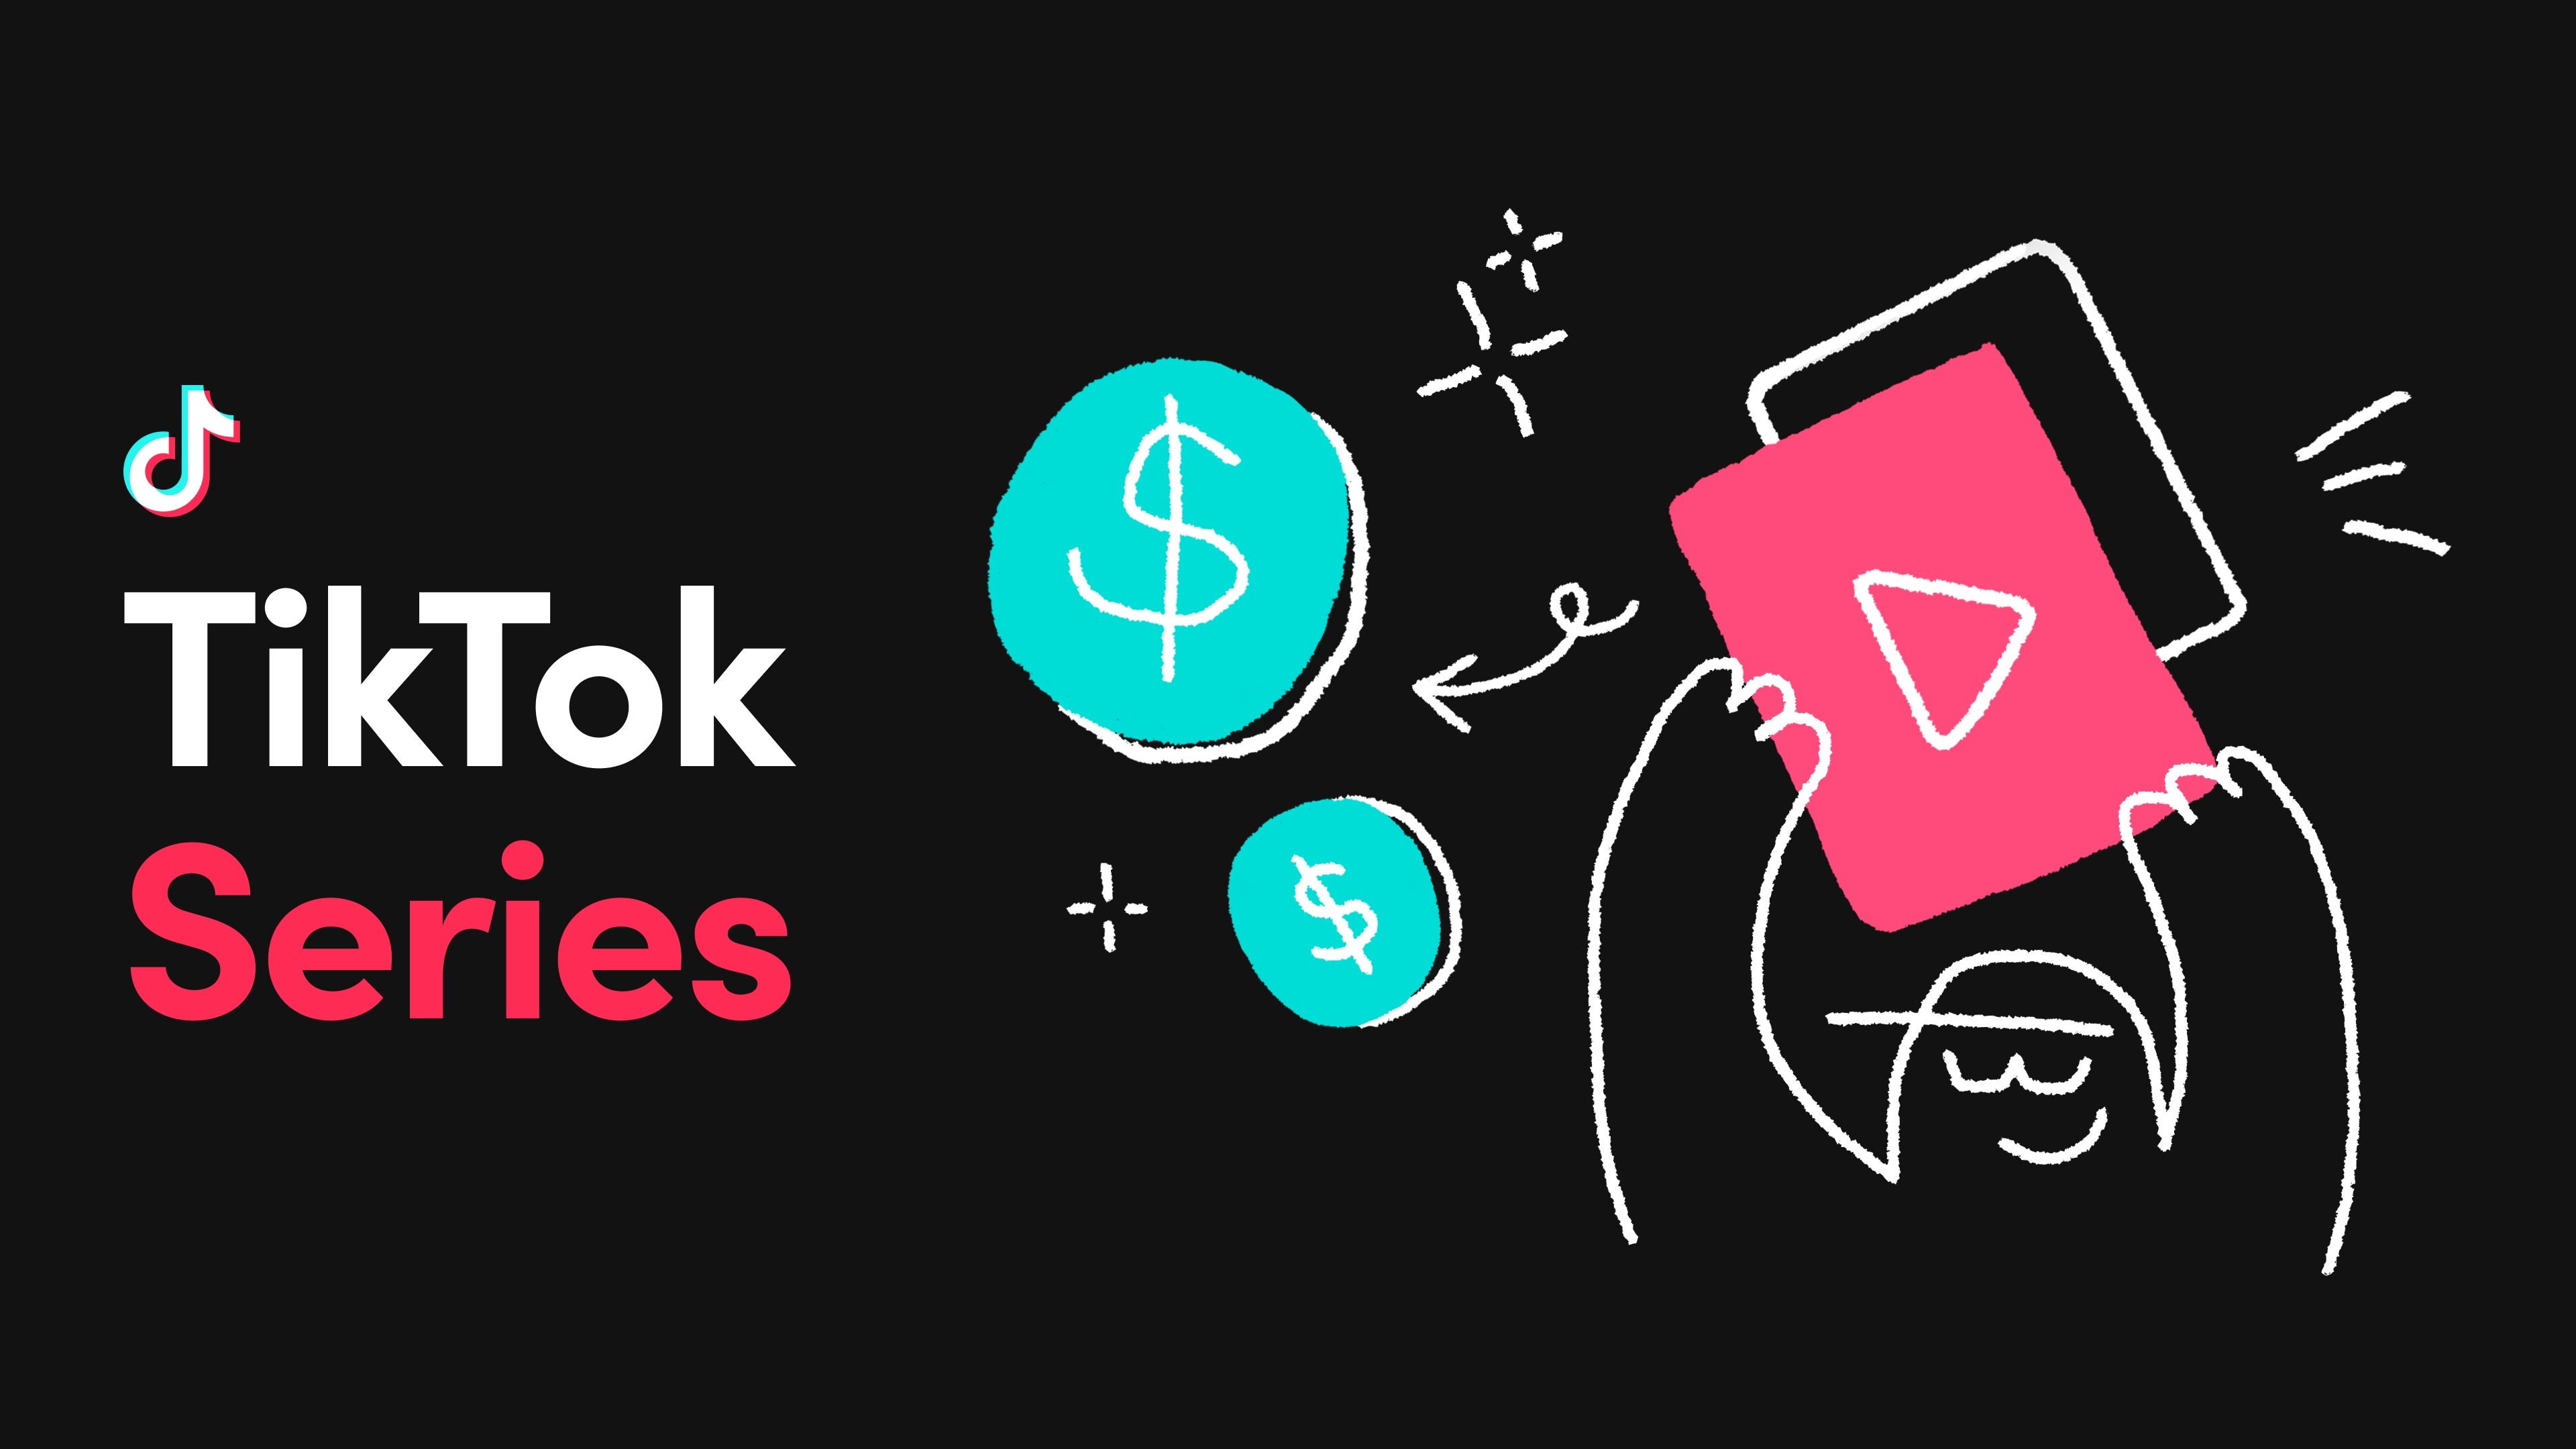 There’s a new way to get paid on TikTok thanks to premium content